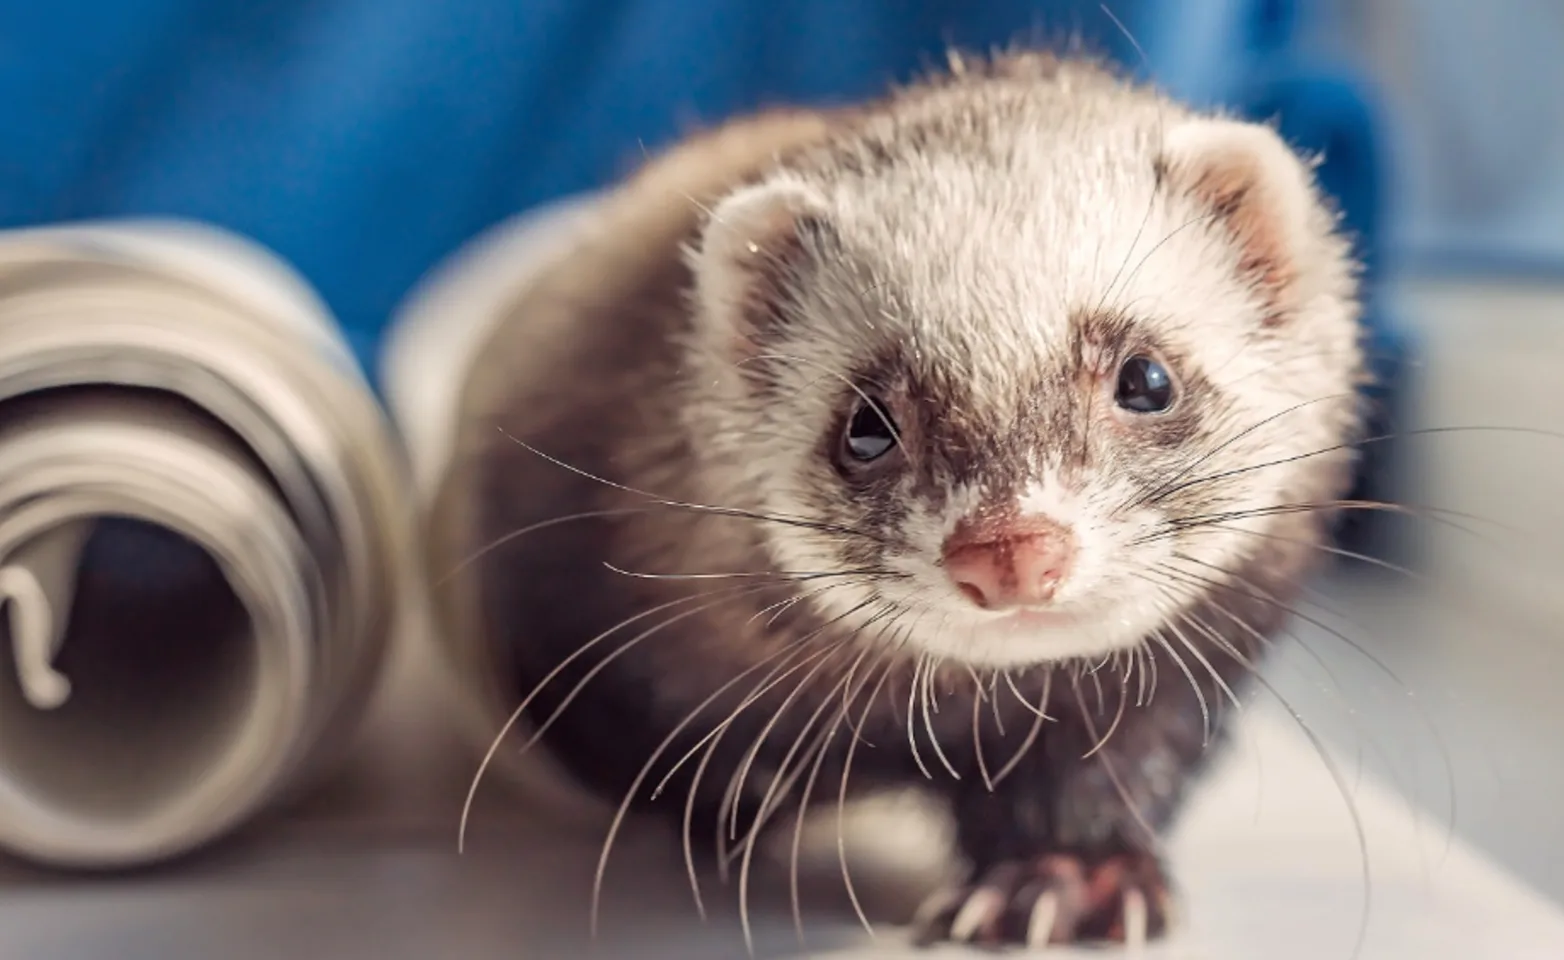 Ferret on a table with blue in the background